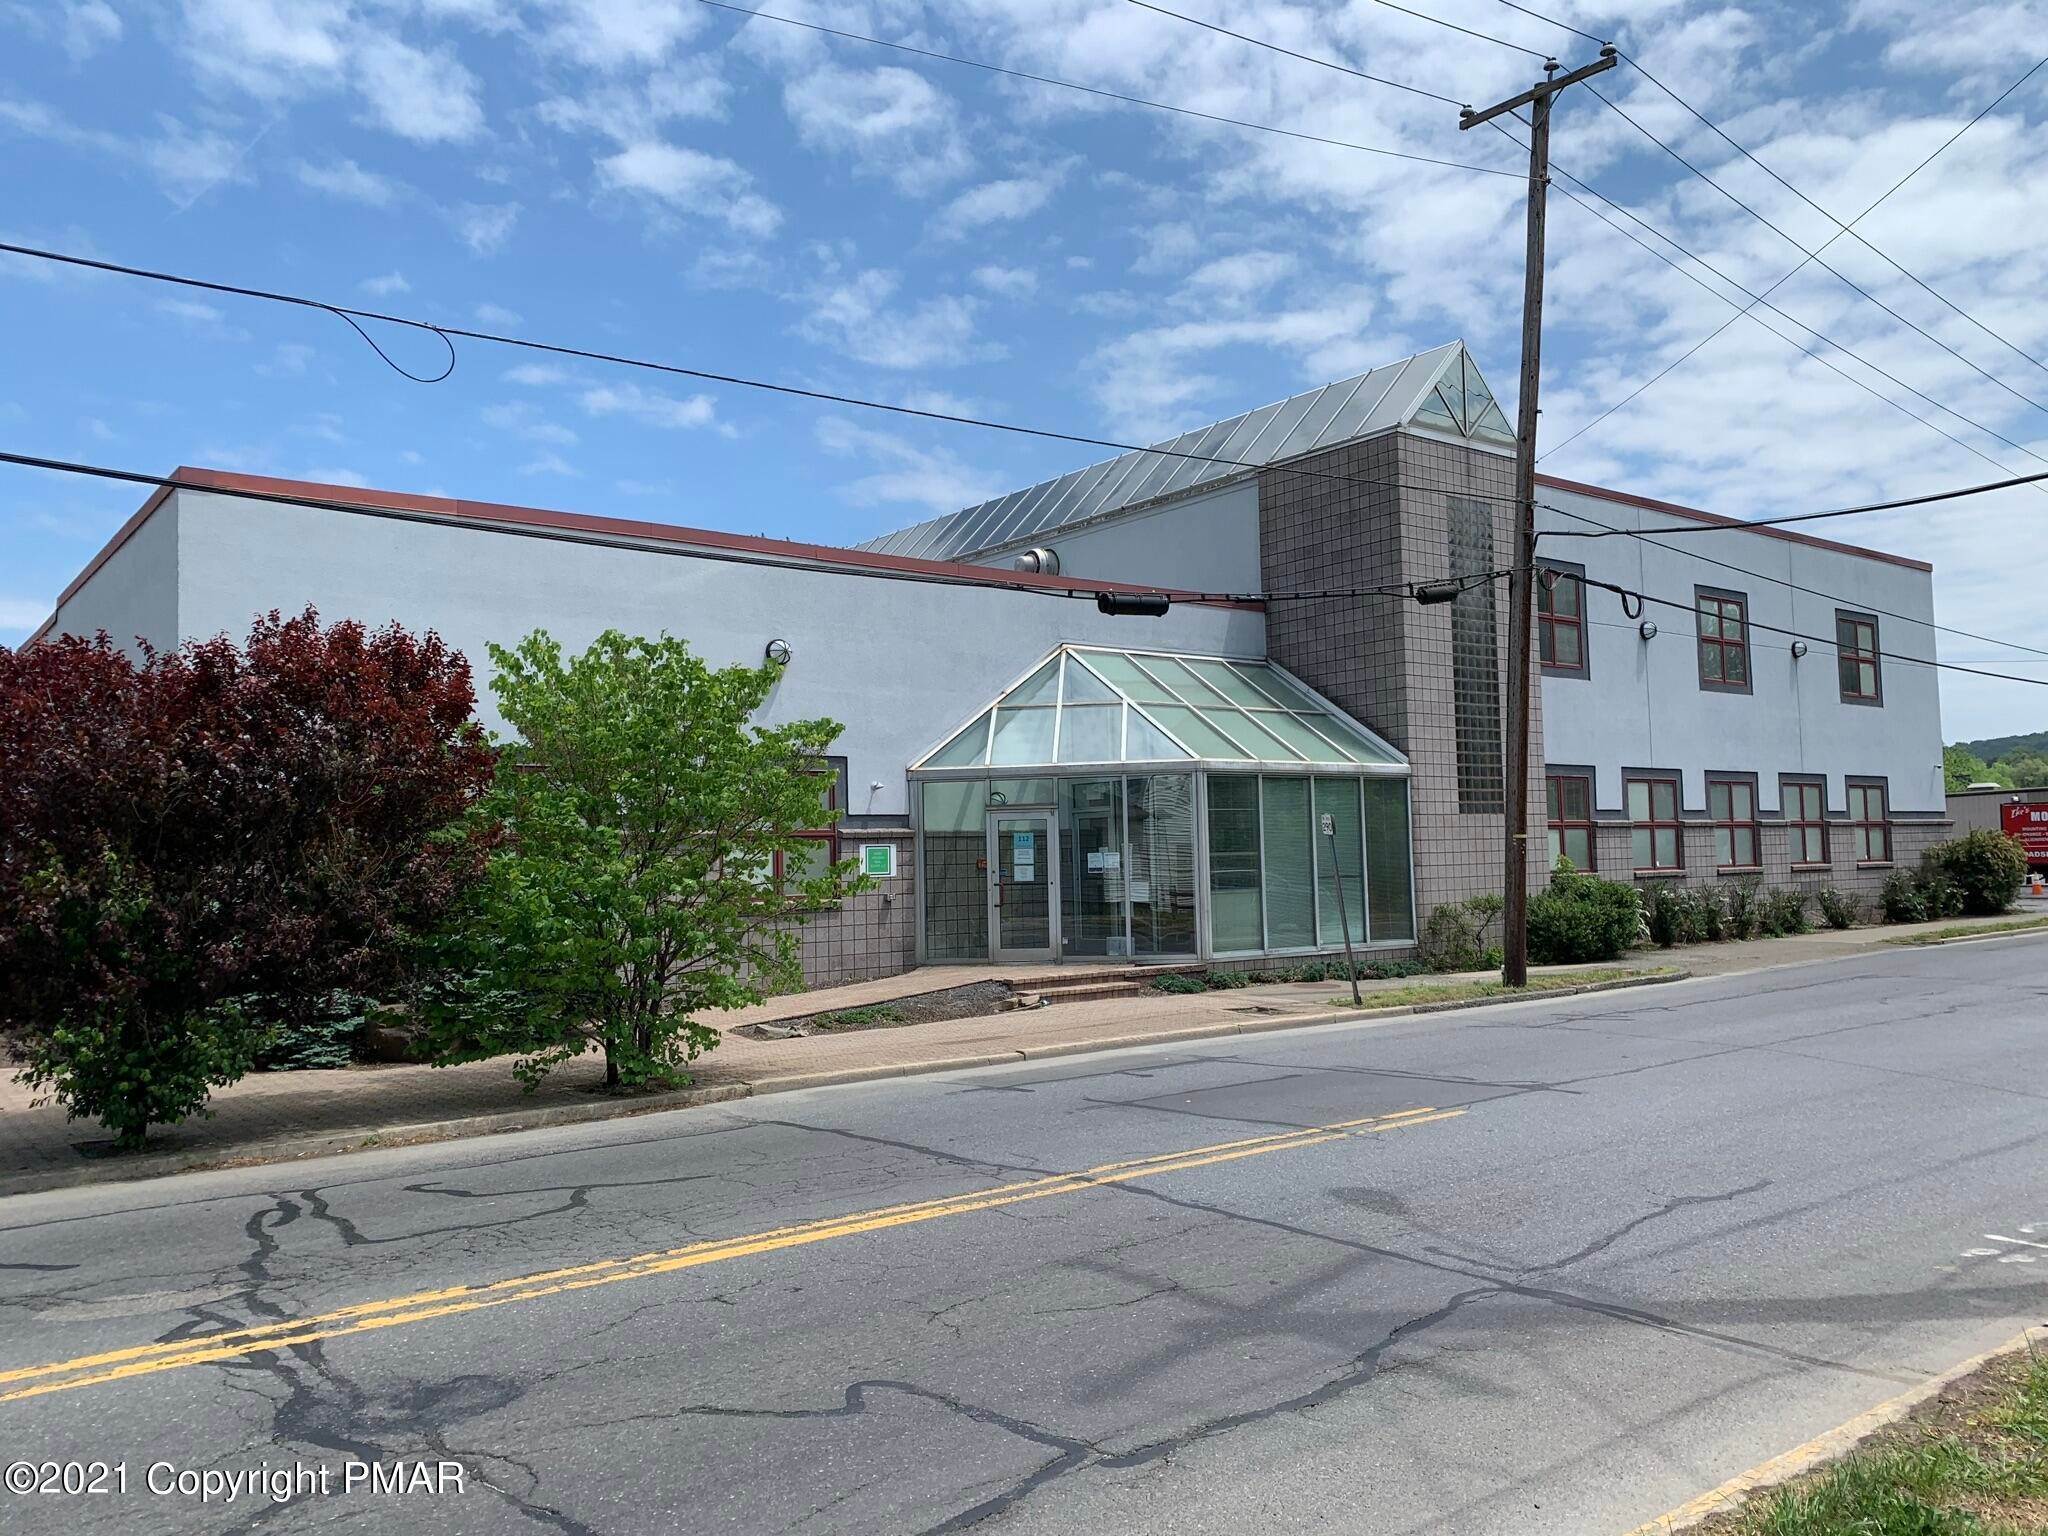 1. Commercial for Sale at 112 N Courtland St., Ste B East Stroudsburg, Pennsylvania 18301 United States